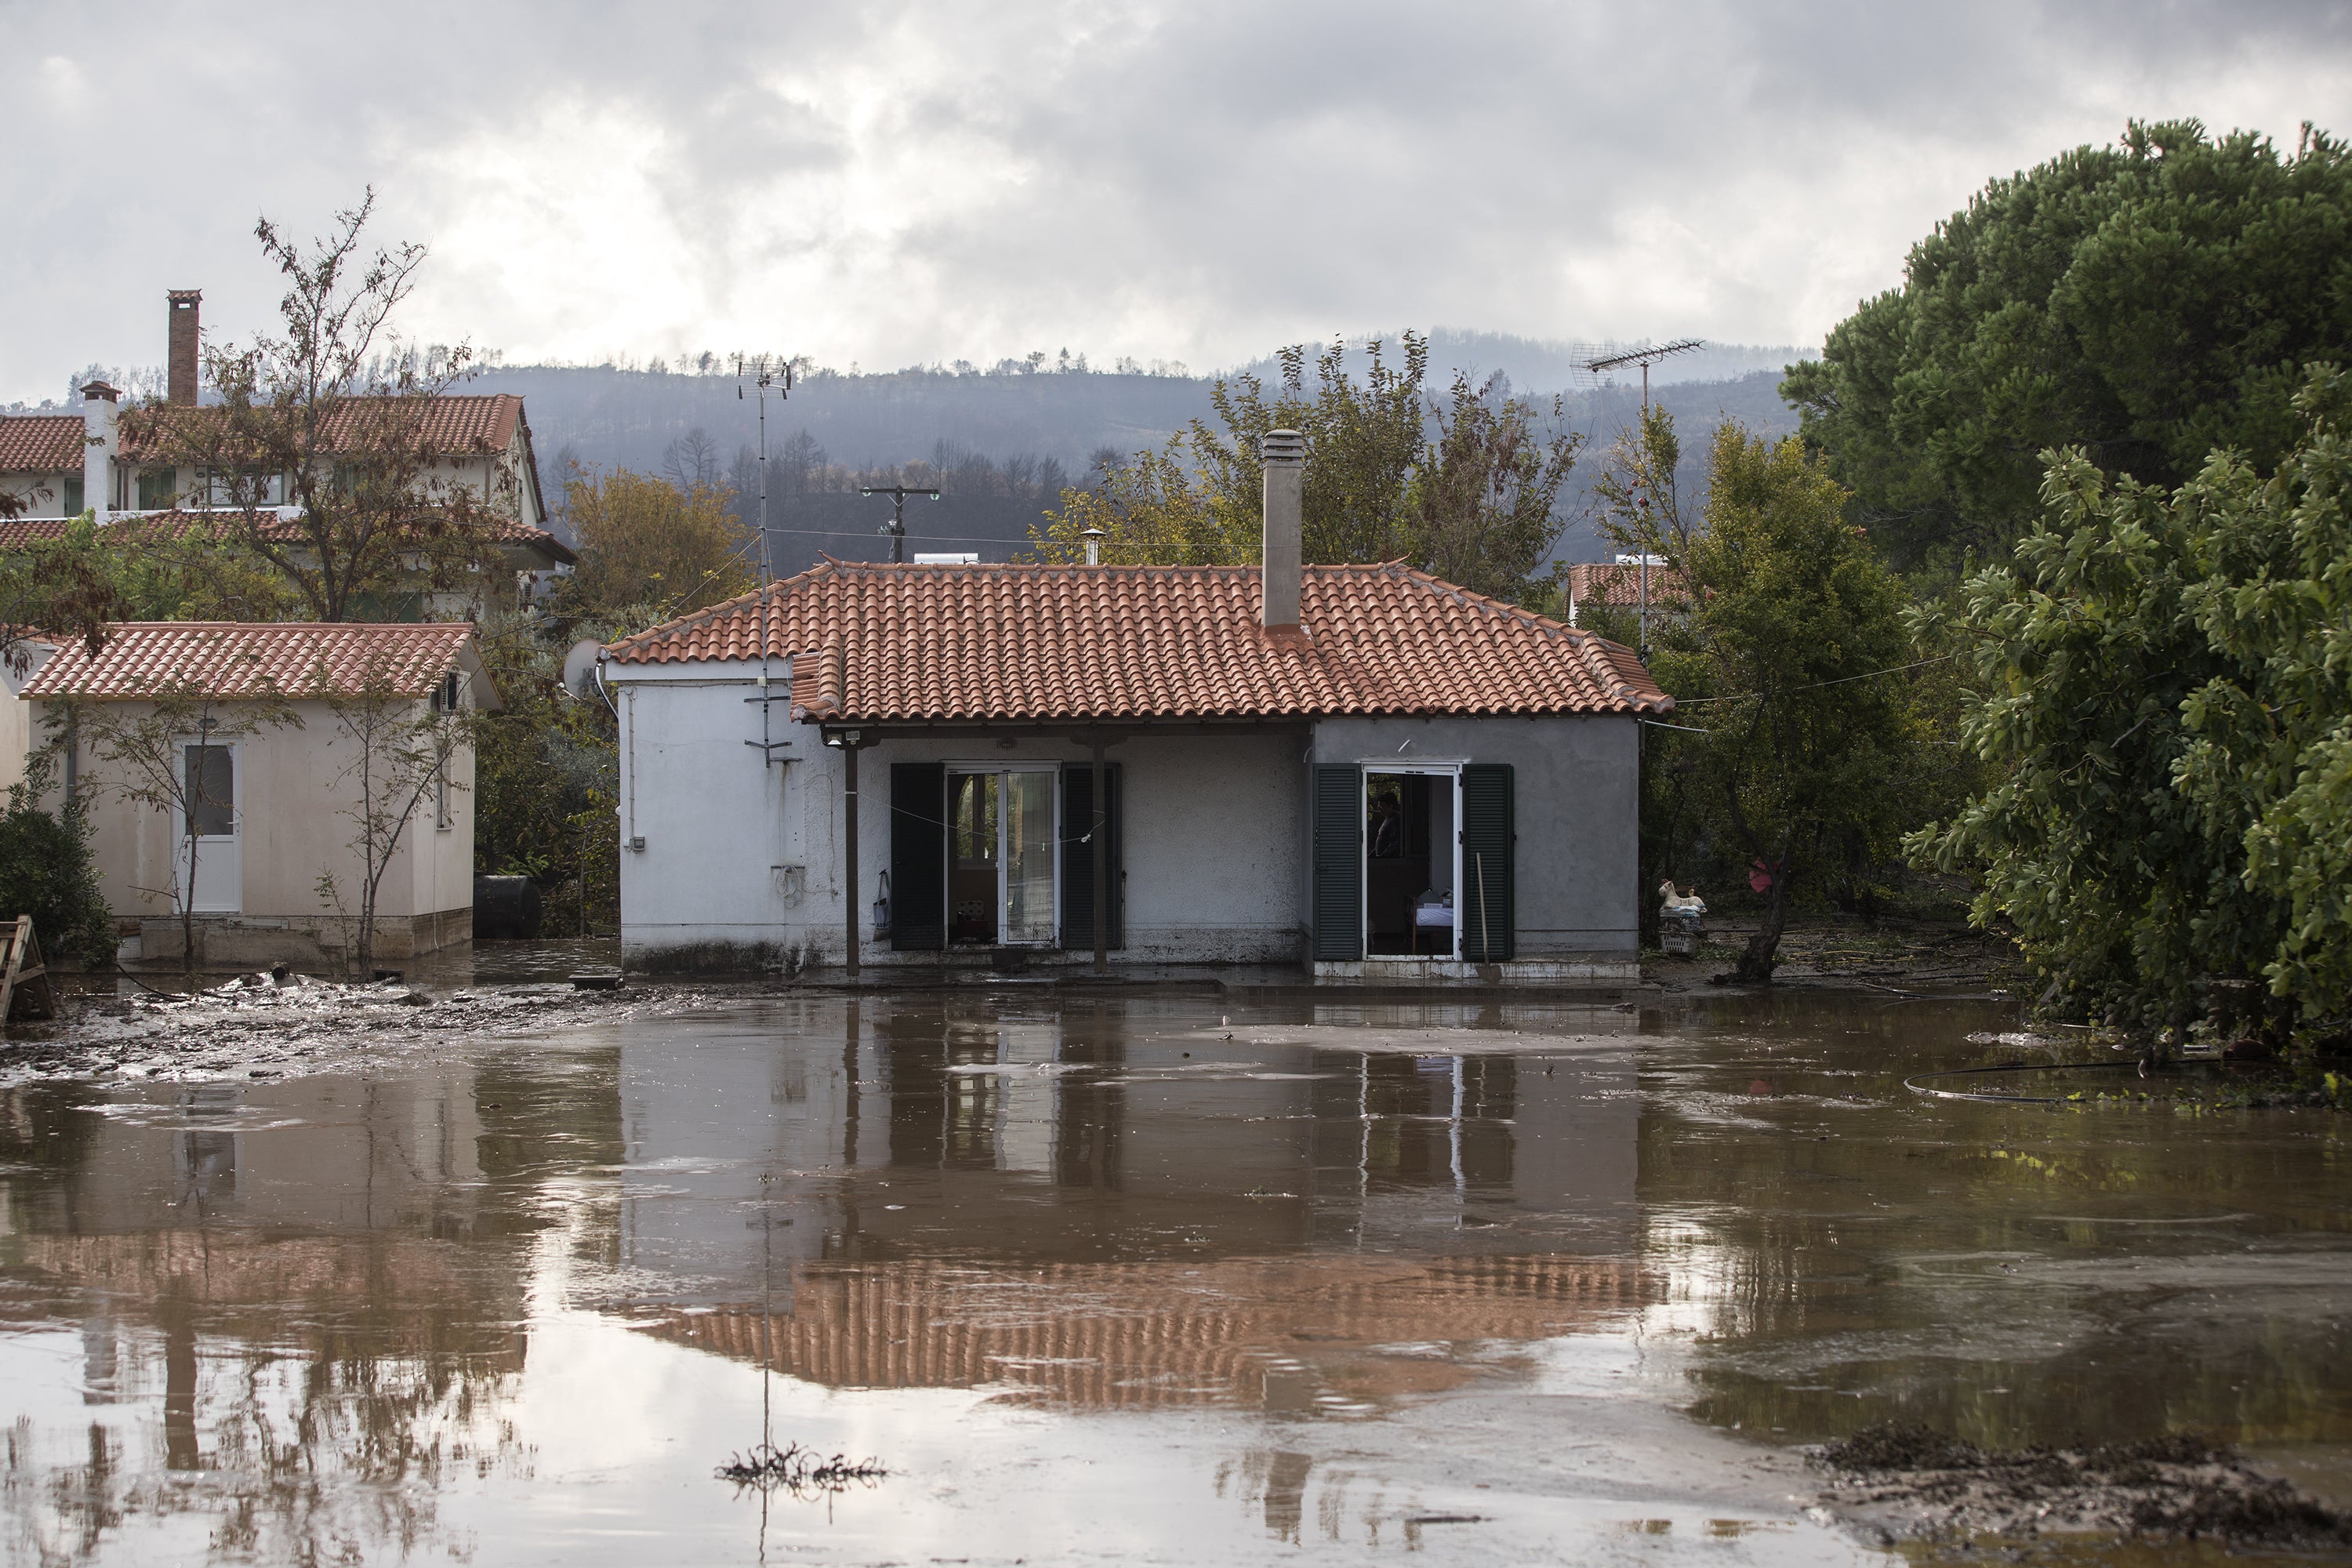 Evia has now been hit by both floods and fires